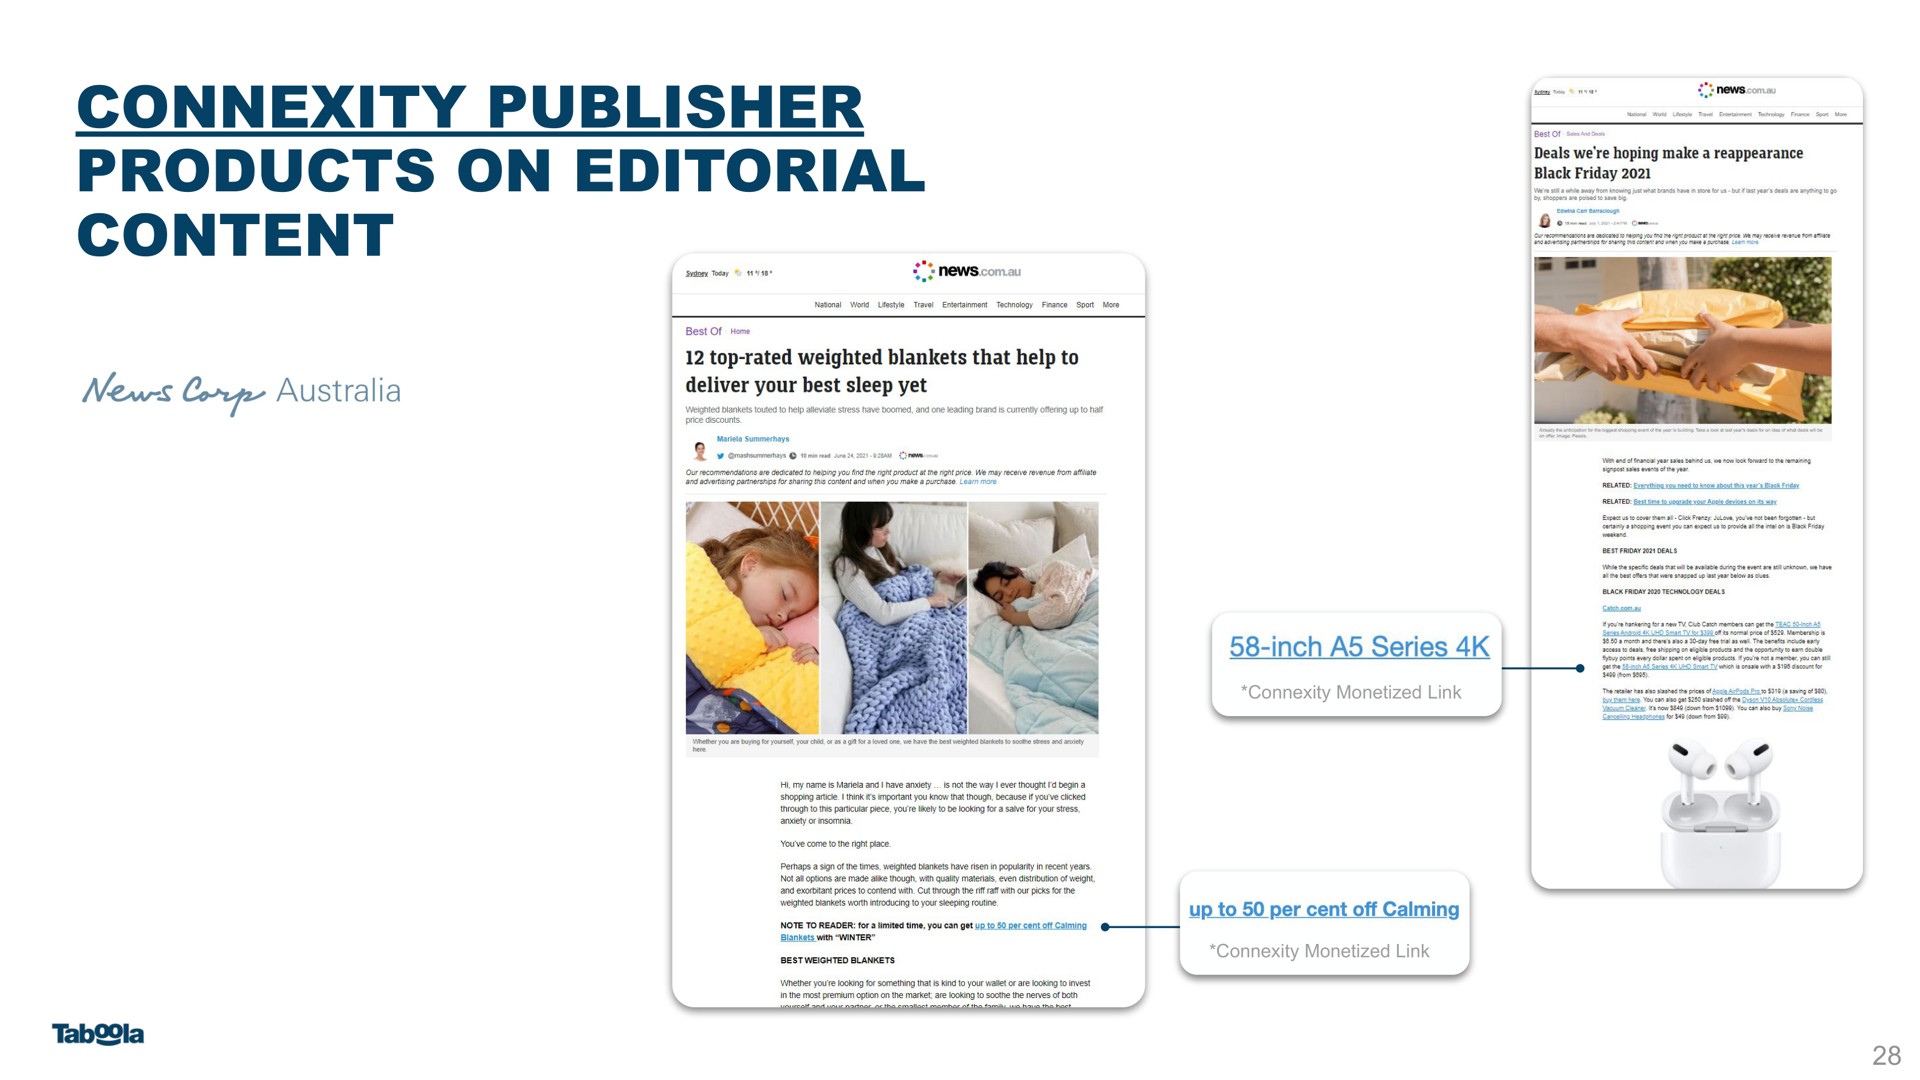 connexity publisher products on editorial content | Taboola